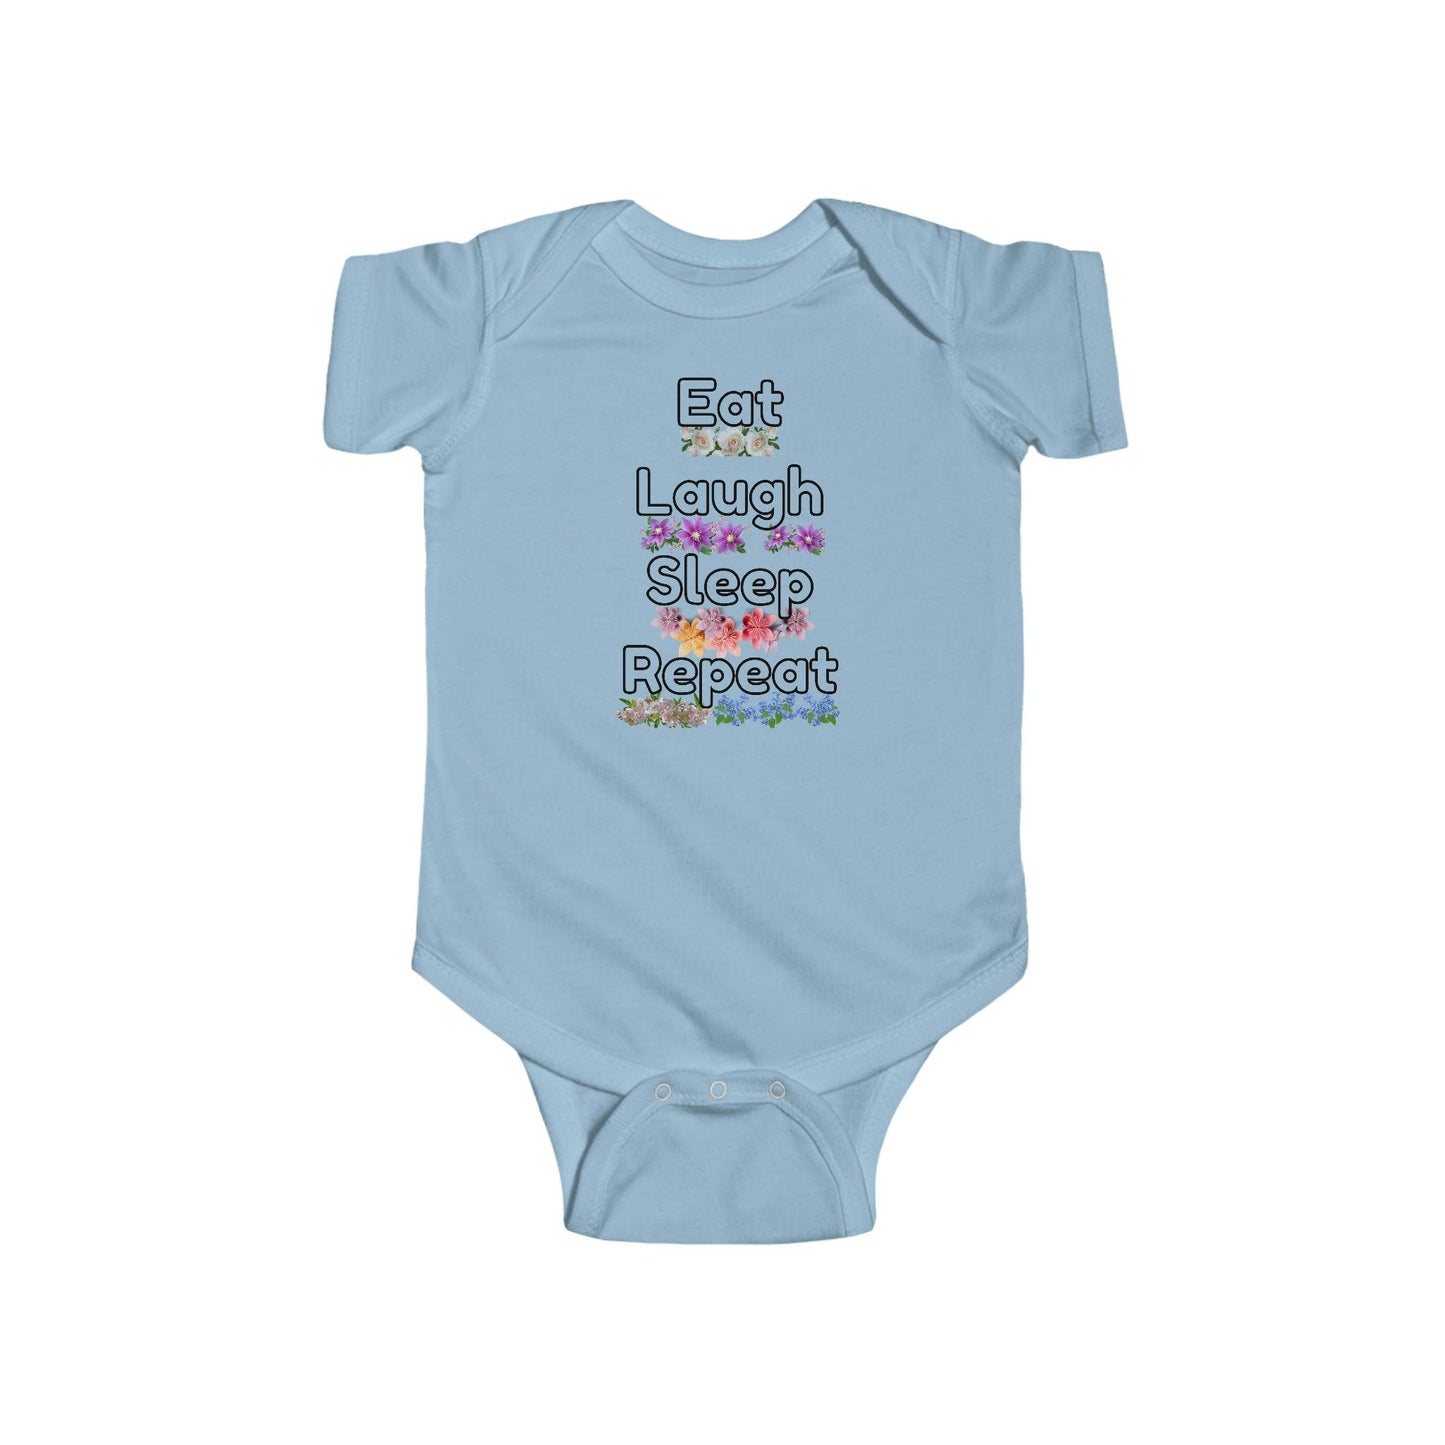 Baby Onesies - Baby gifts - Bodysuit - Baby clothes - Eat laugh sleep repeat